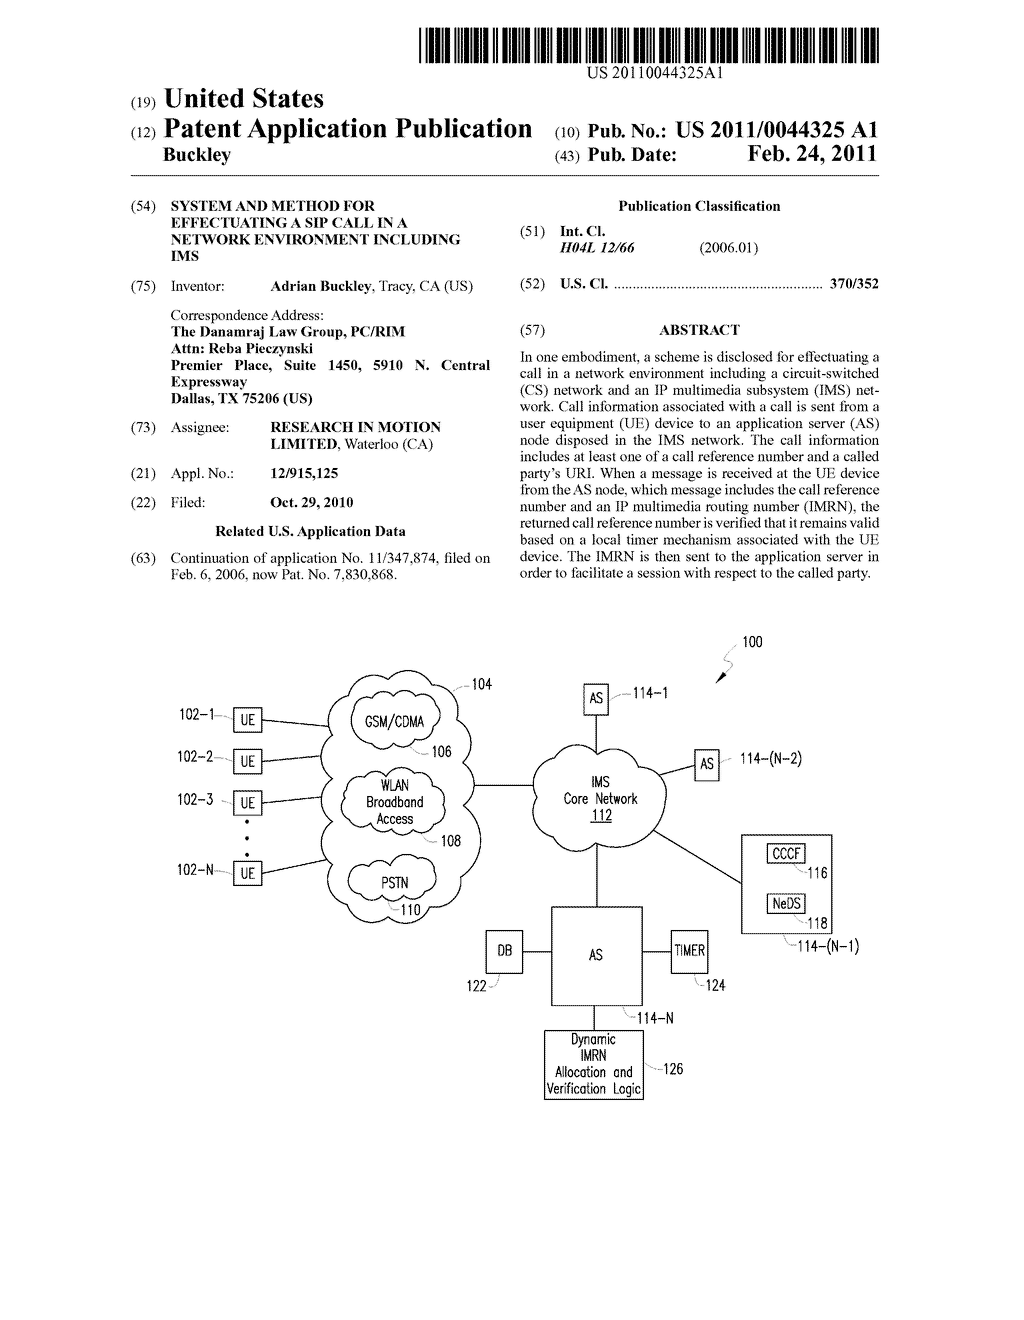 System and Method for Effectuating a SIP Call in a Network Environment Including IMS - diagram, schematic, and image 01